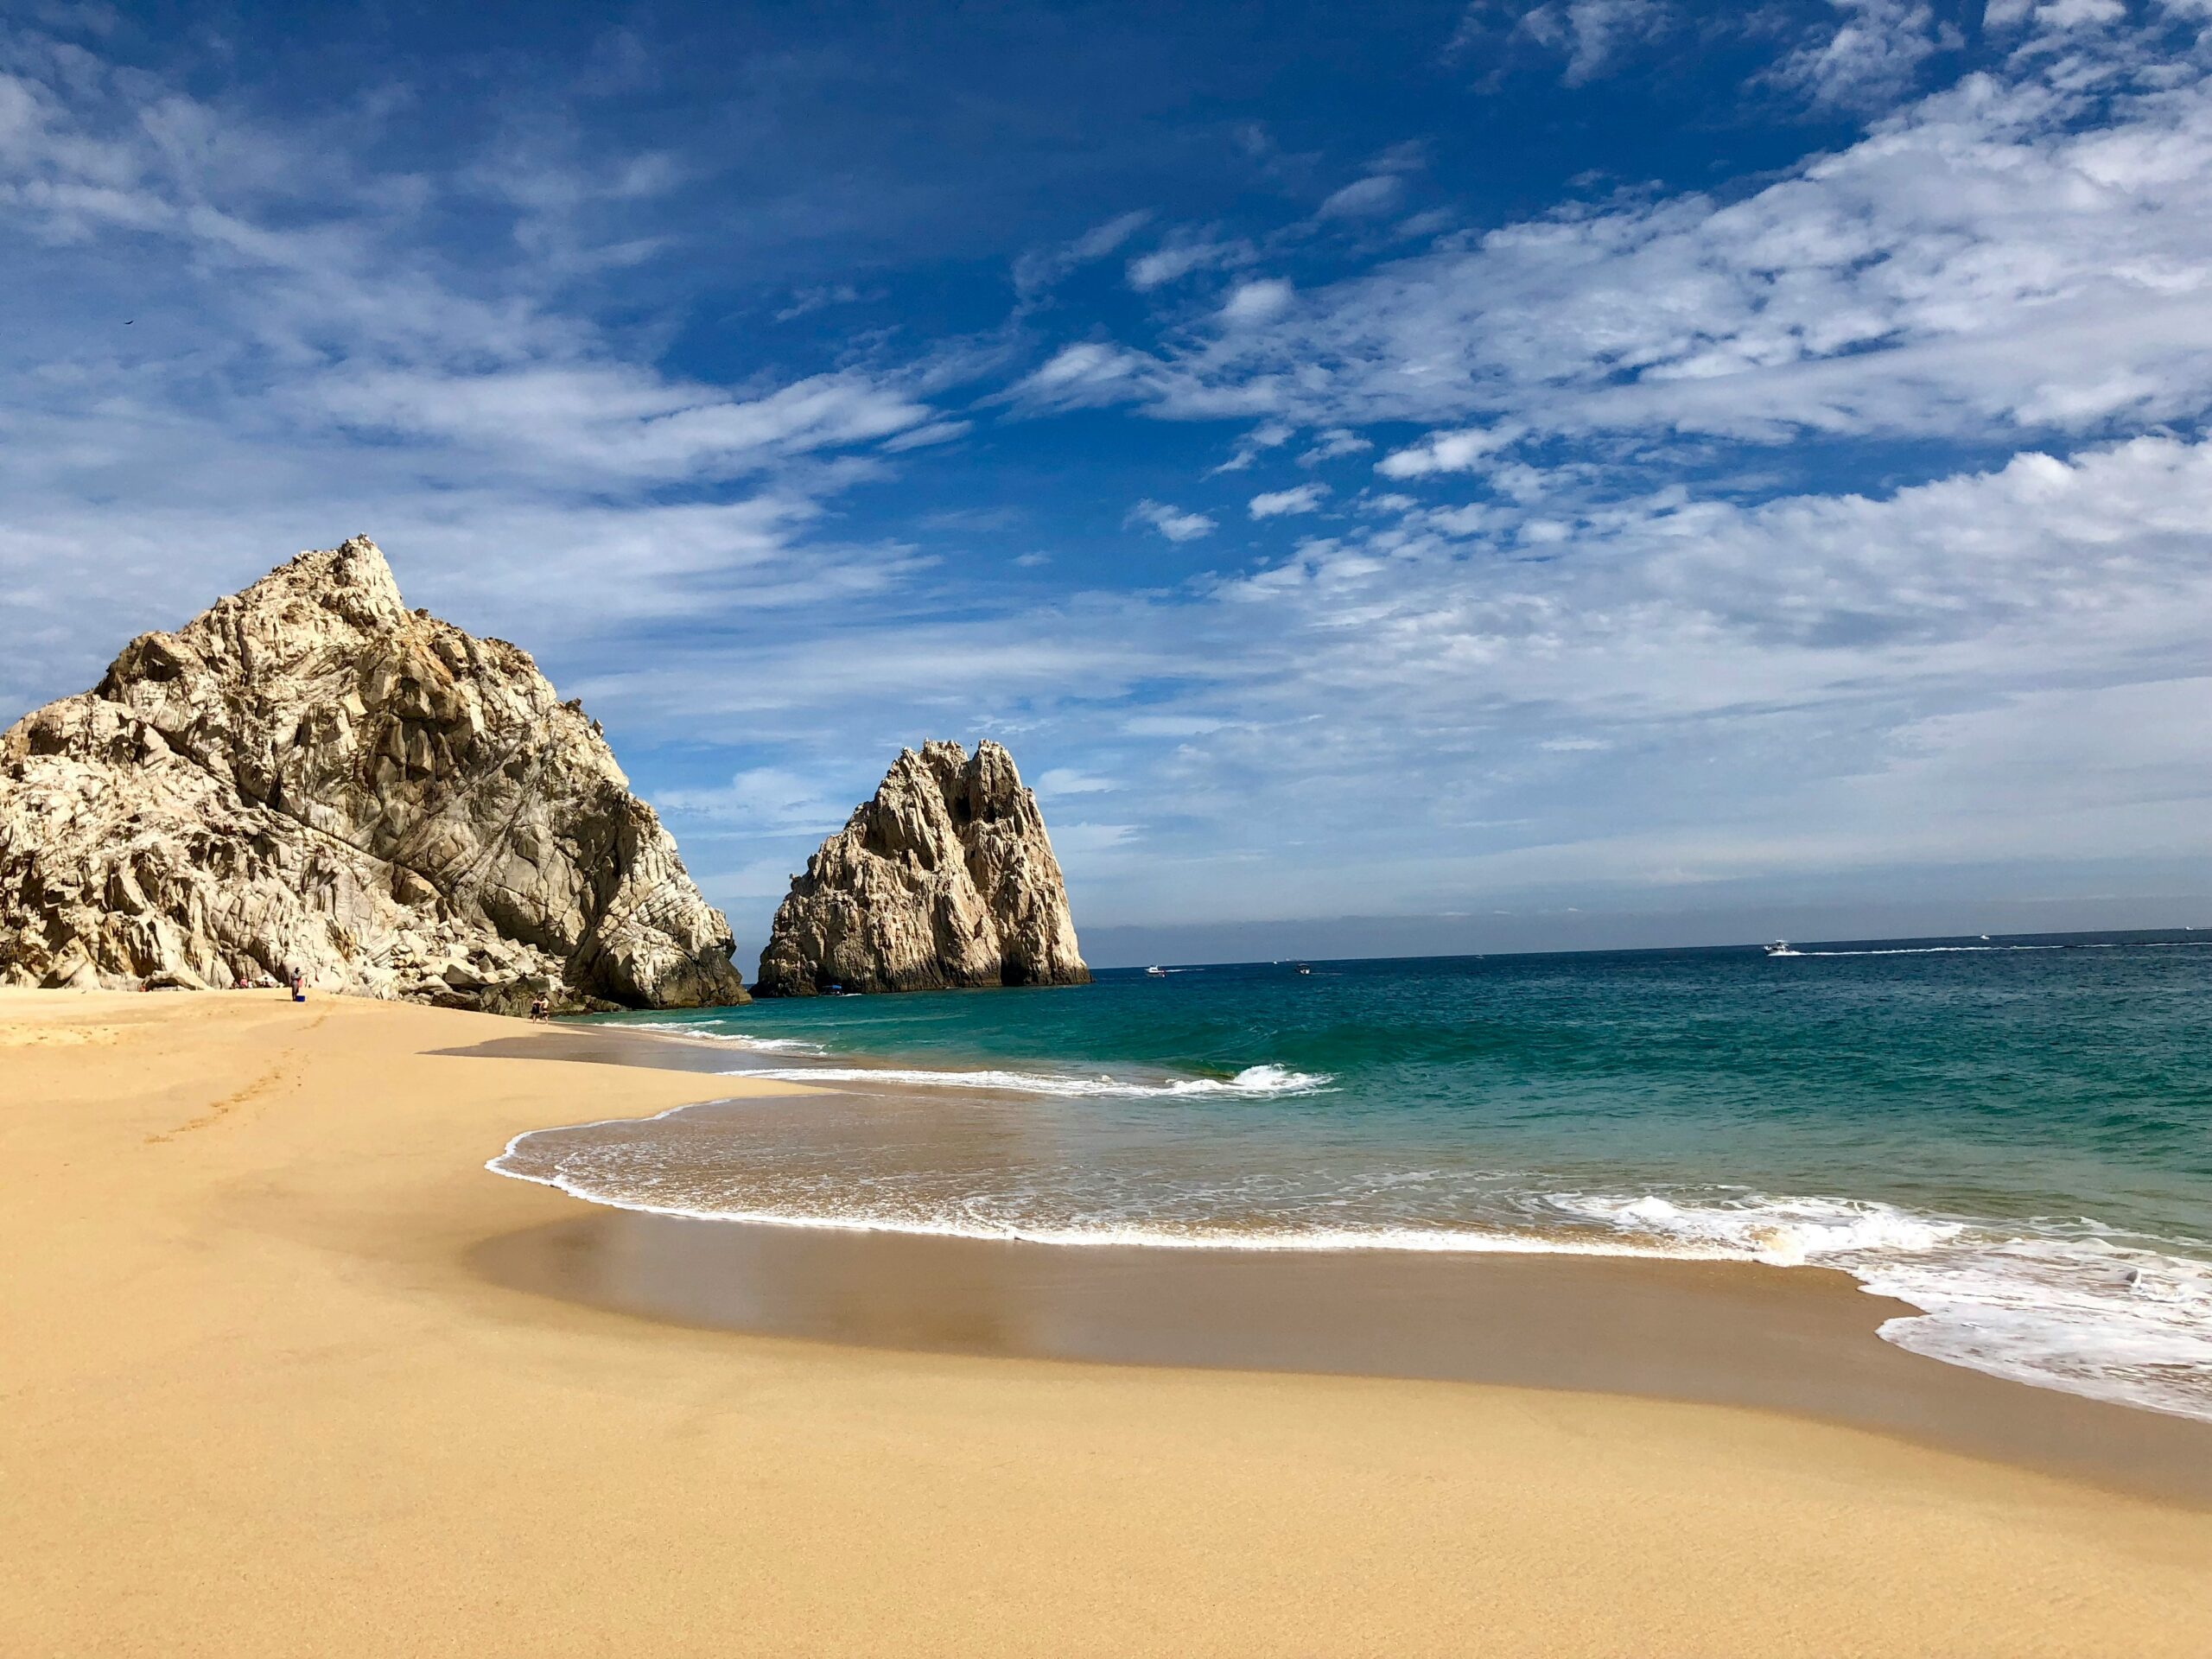 Travelers should check out these intimate beaches in Mexico. 
Pictured: a Mexican beach with cliffs and turquoise waters on a bright cloudy day 